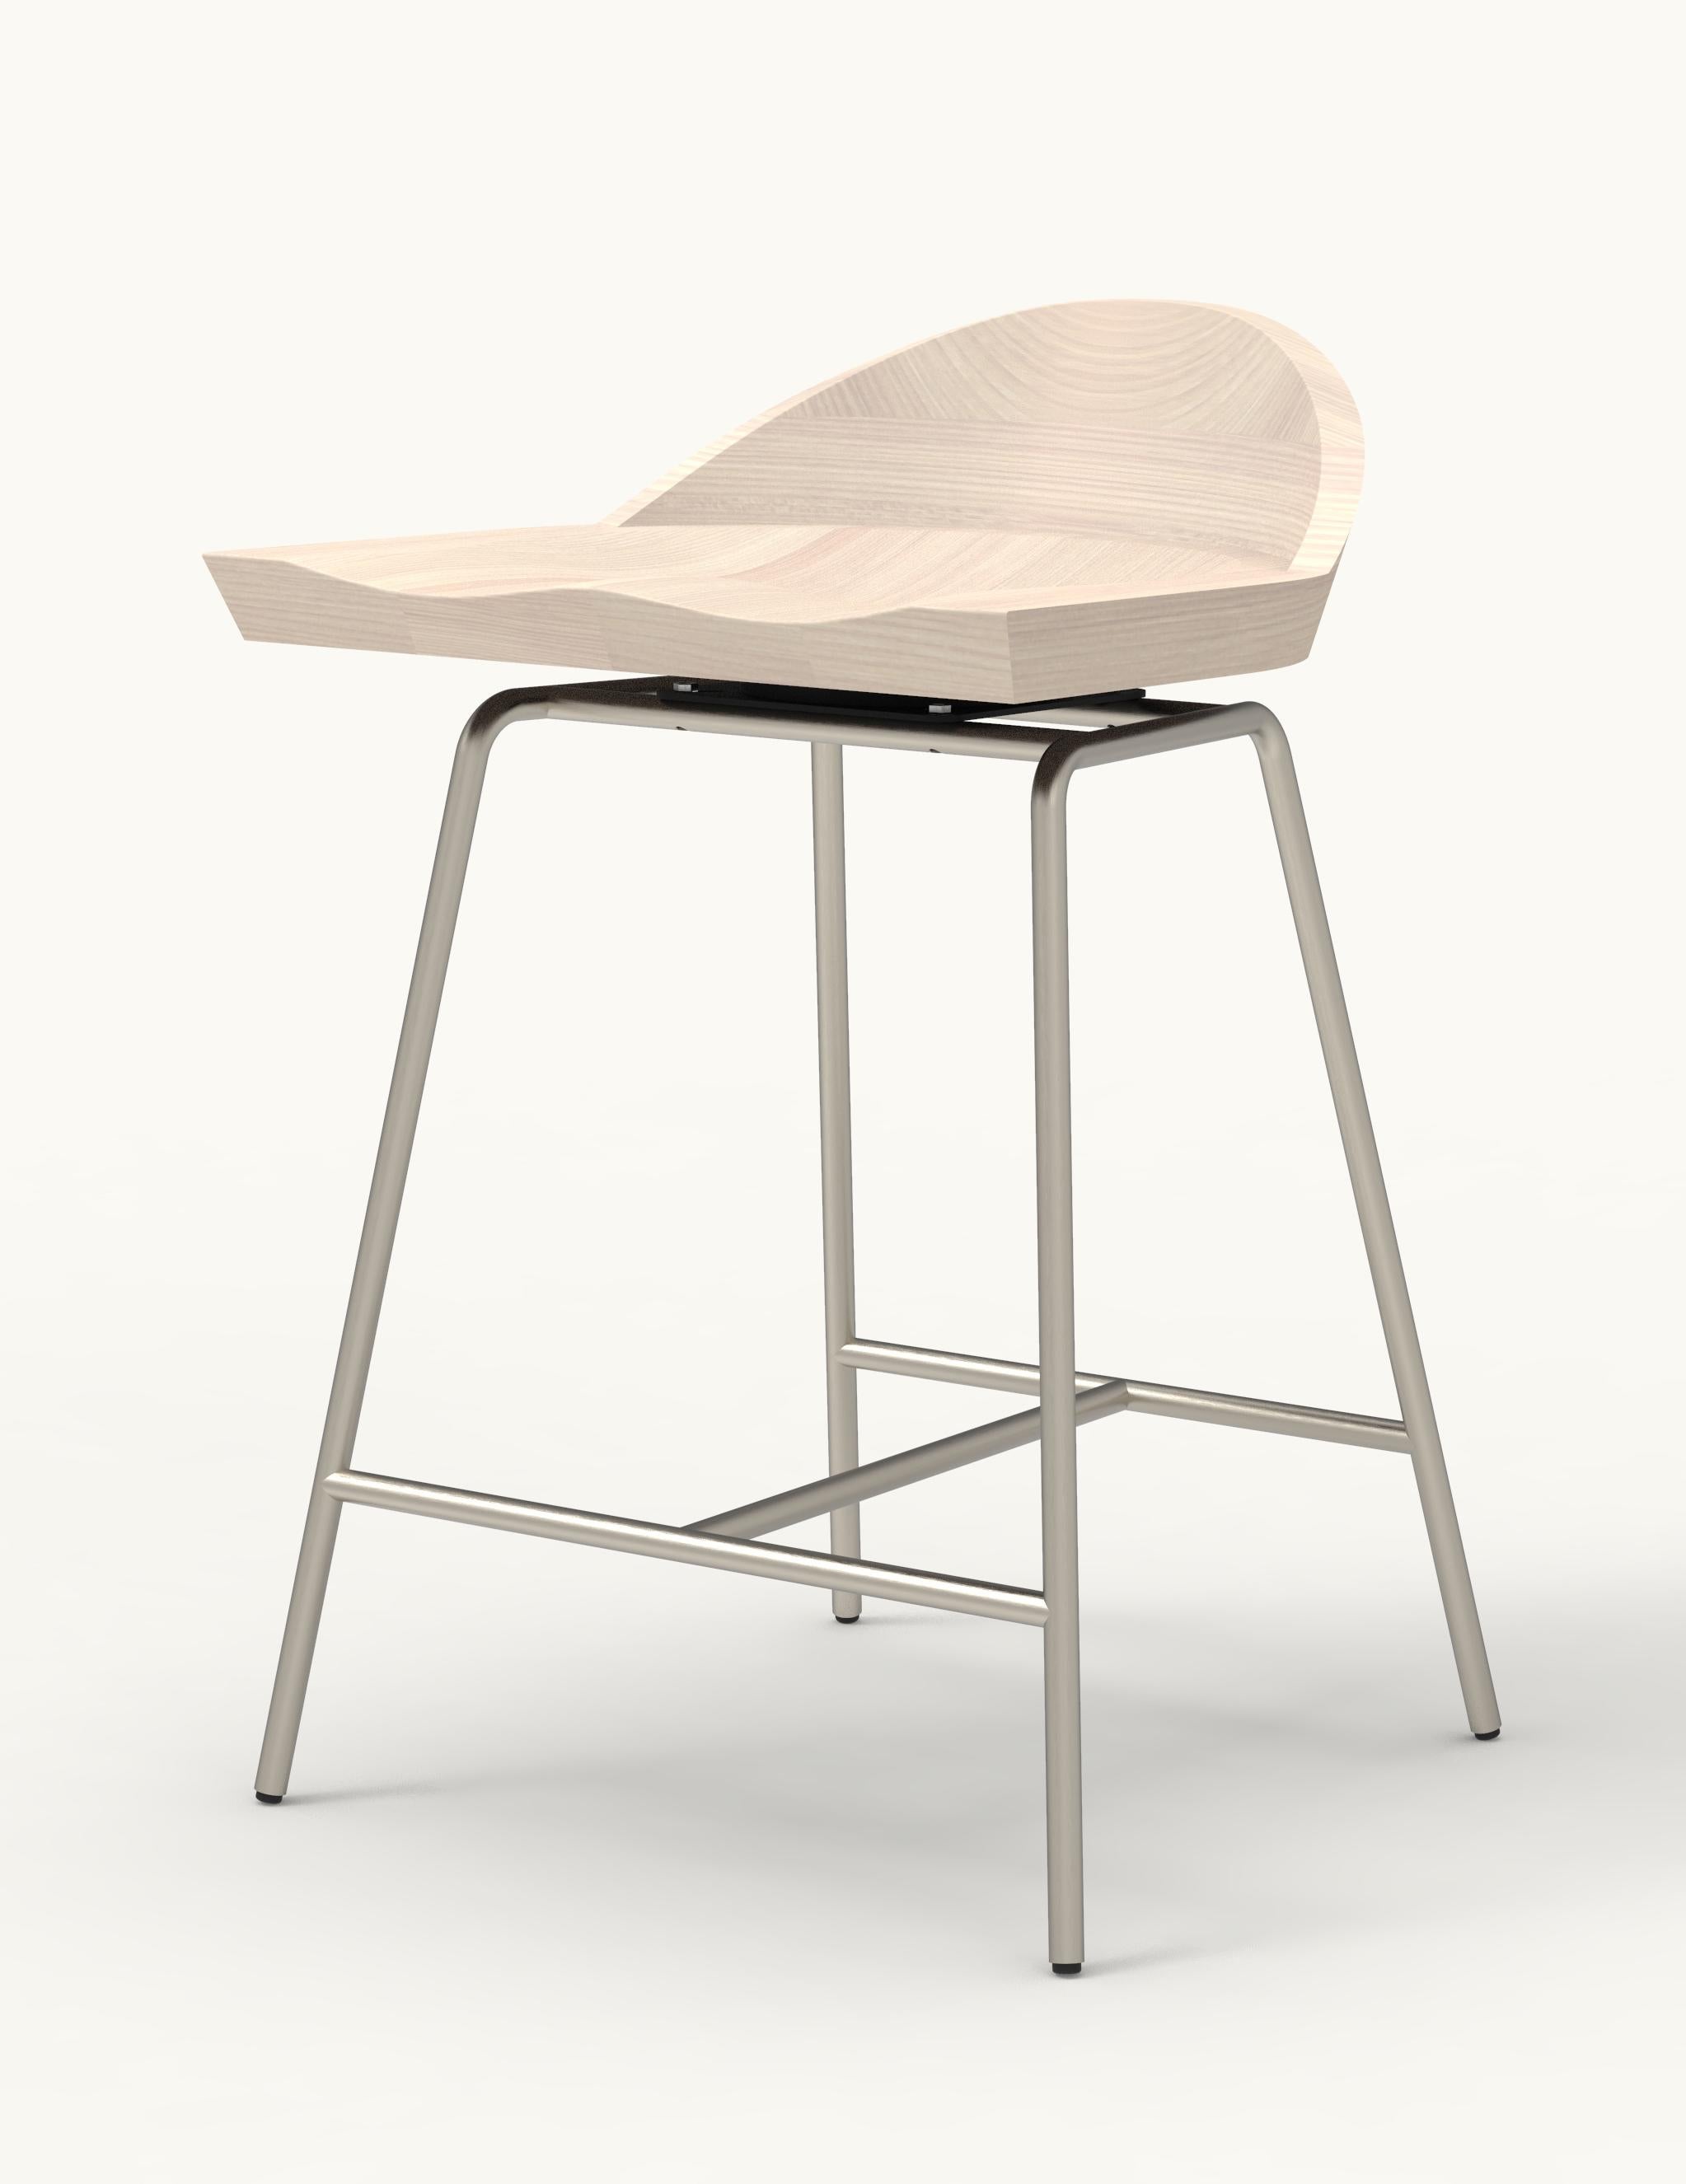 For Sale: Silver (Metal Satin Nickel) Spindle Counter Stool in Solid White Ash and Steel Designed by Craig Bassam